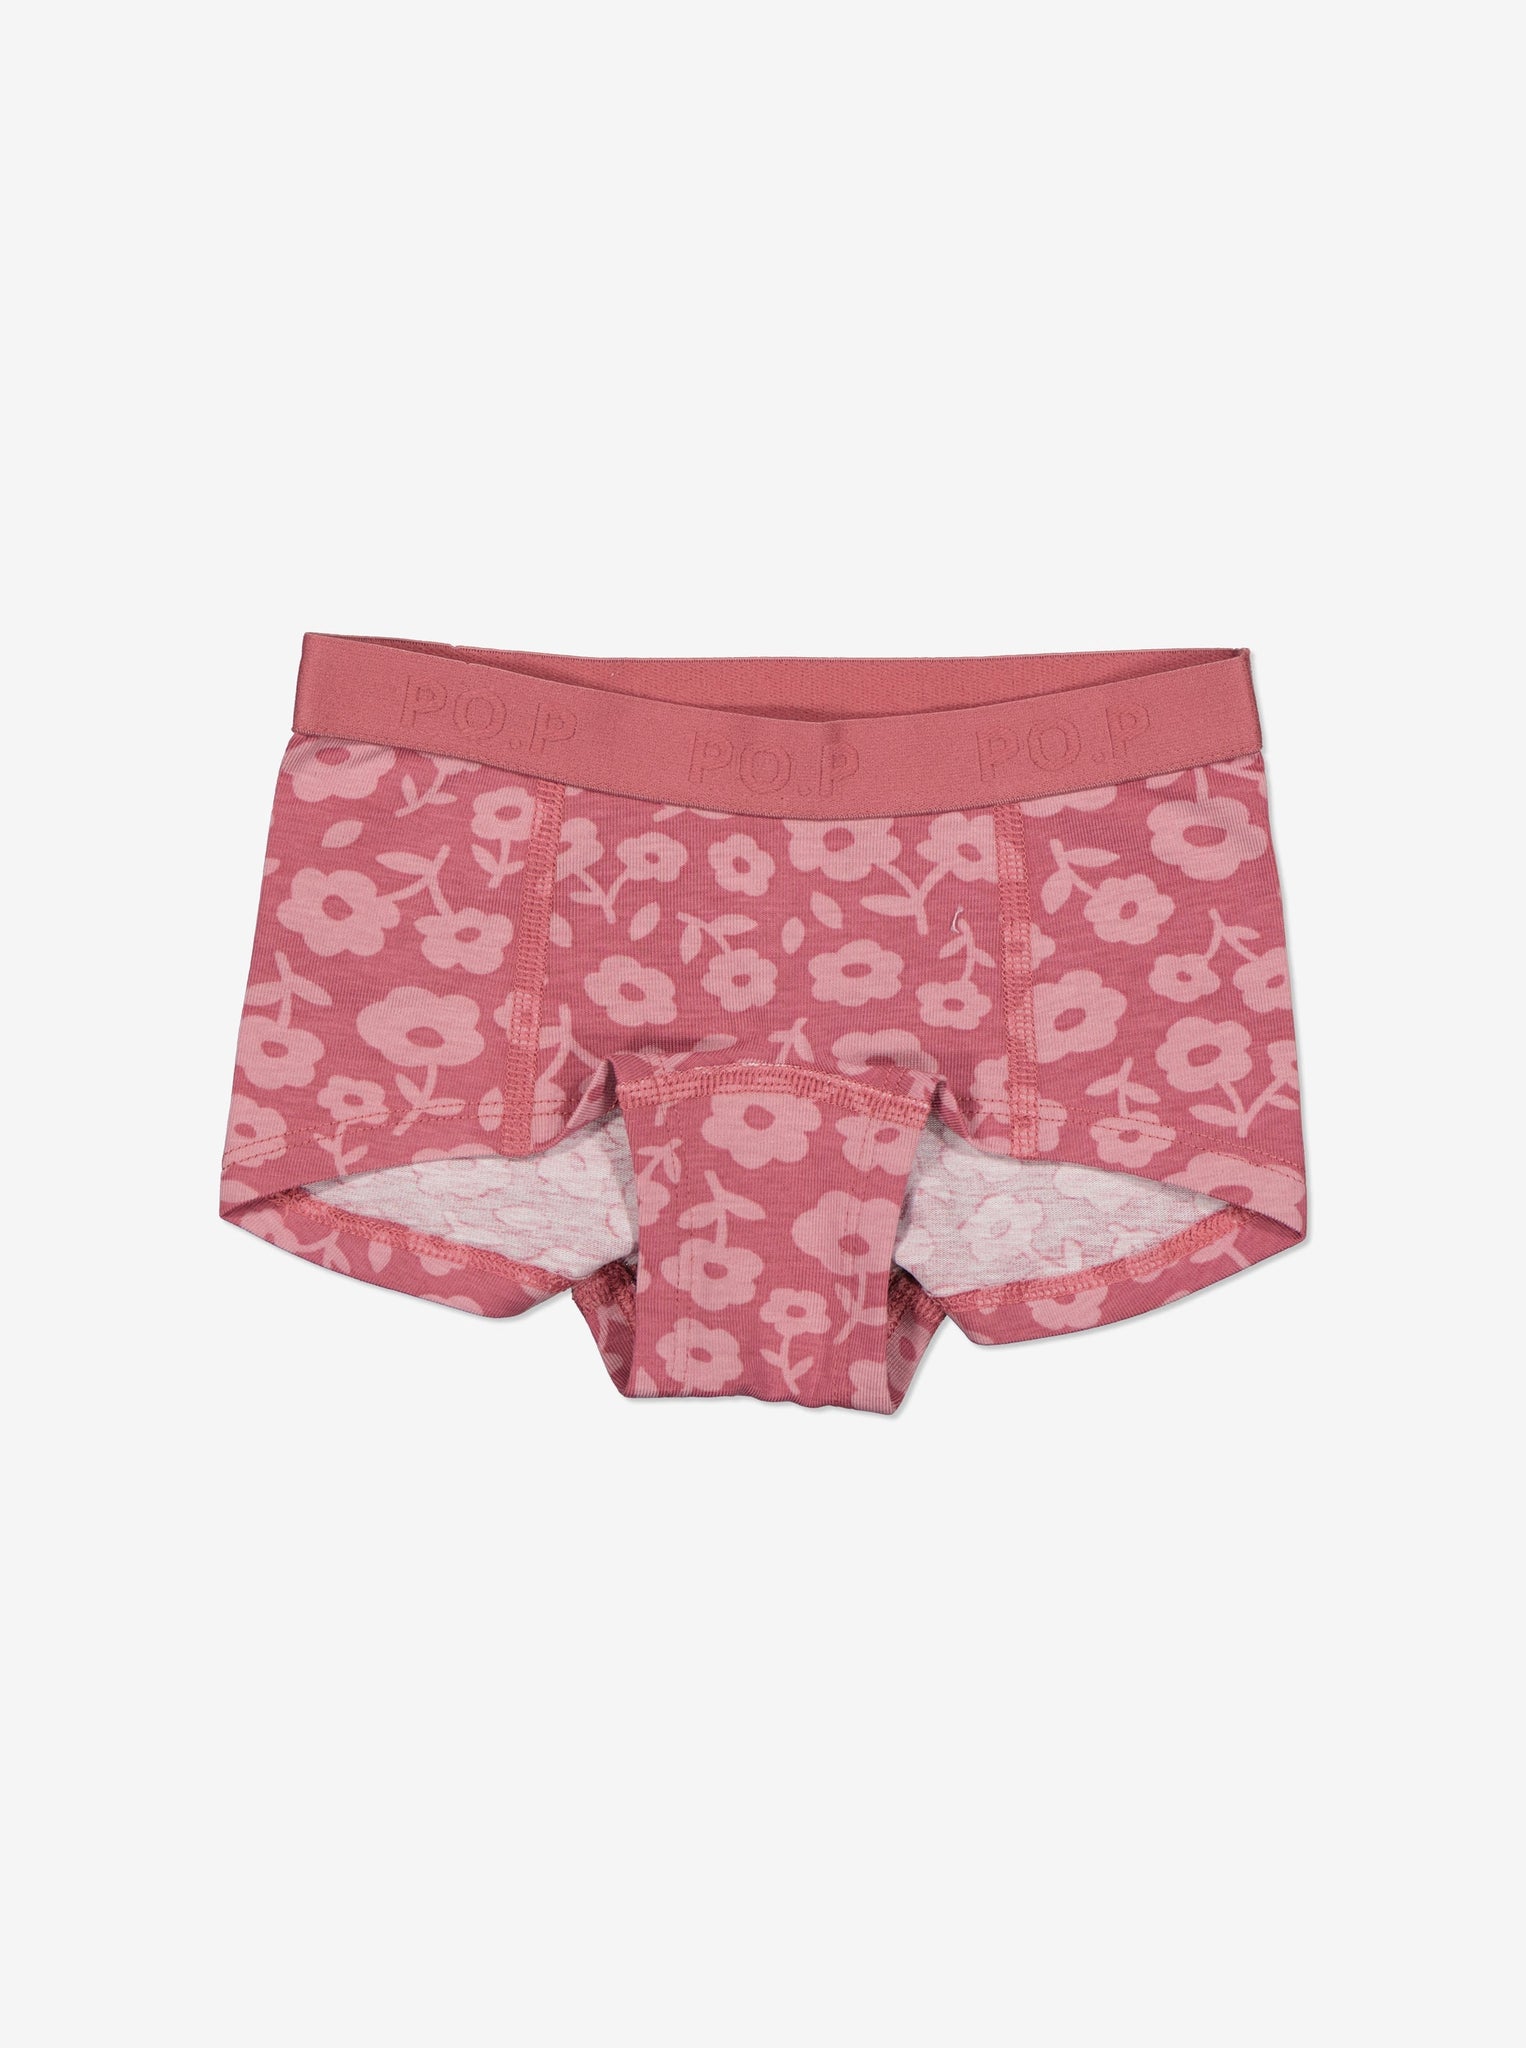 Organic Cotton Floral Girls Briefs from the Polarn O. Pyret Kidswear collection. Clothes made using sustainably sourced materials.